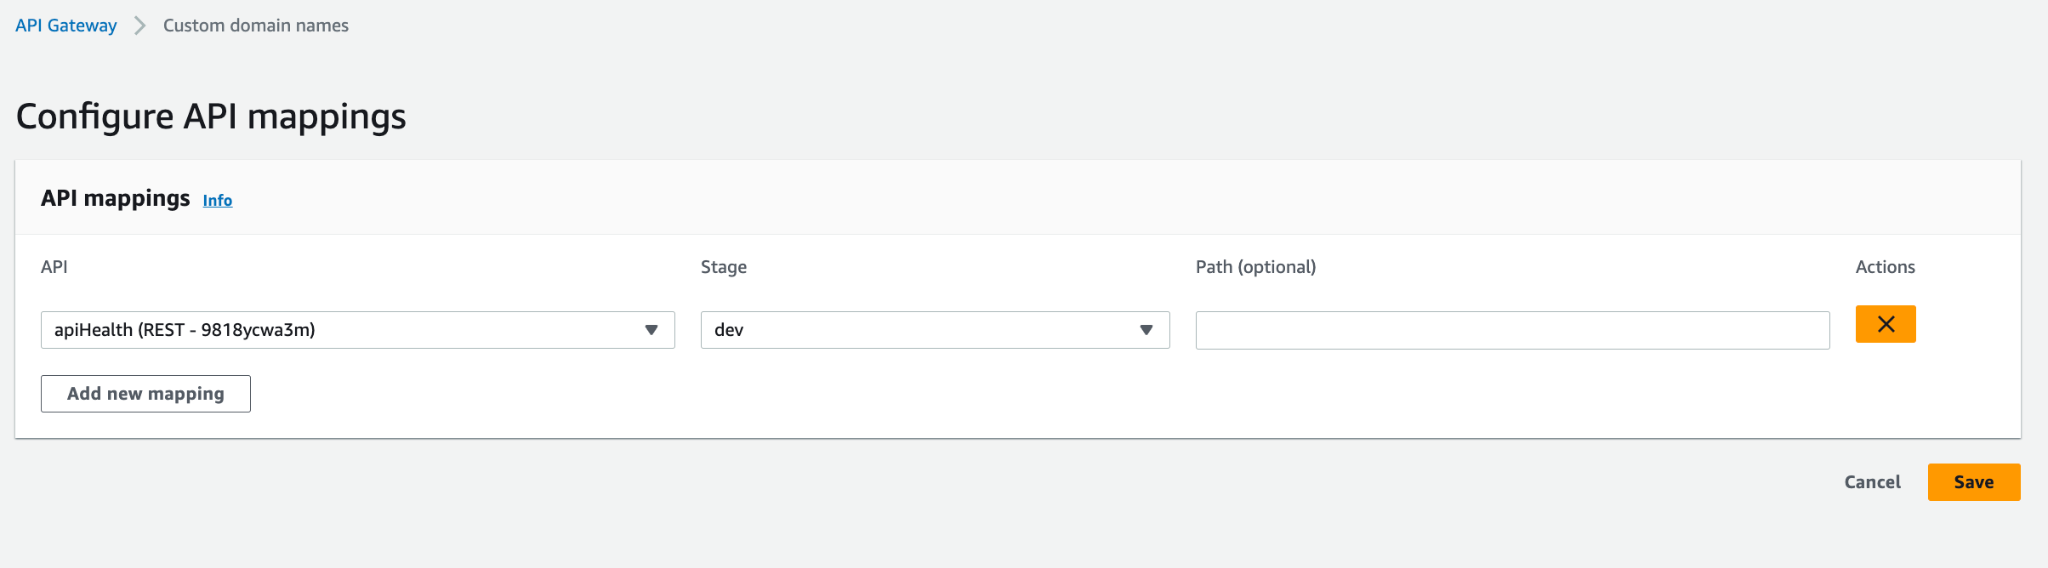 AWS API Gateway Mapping: Adding a new mapping for apiHealth REST API.